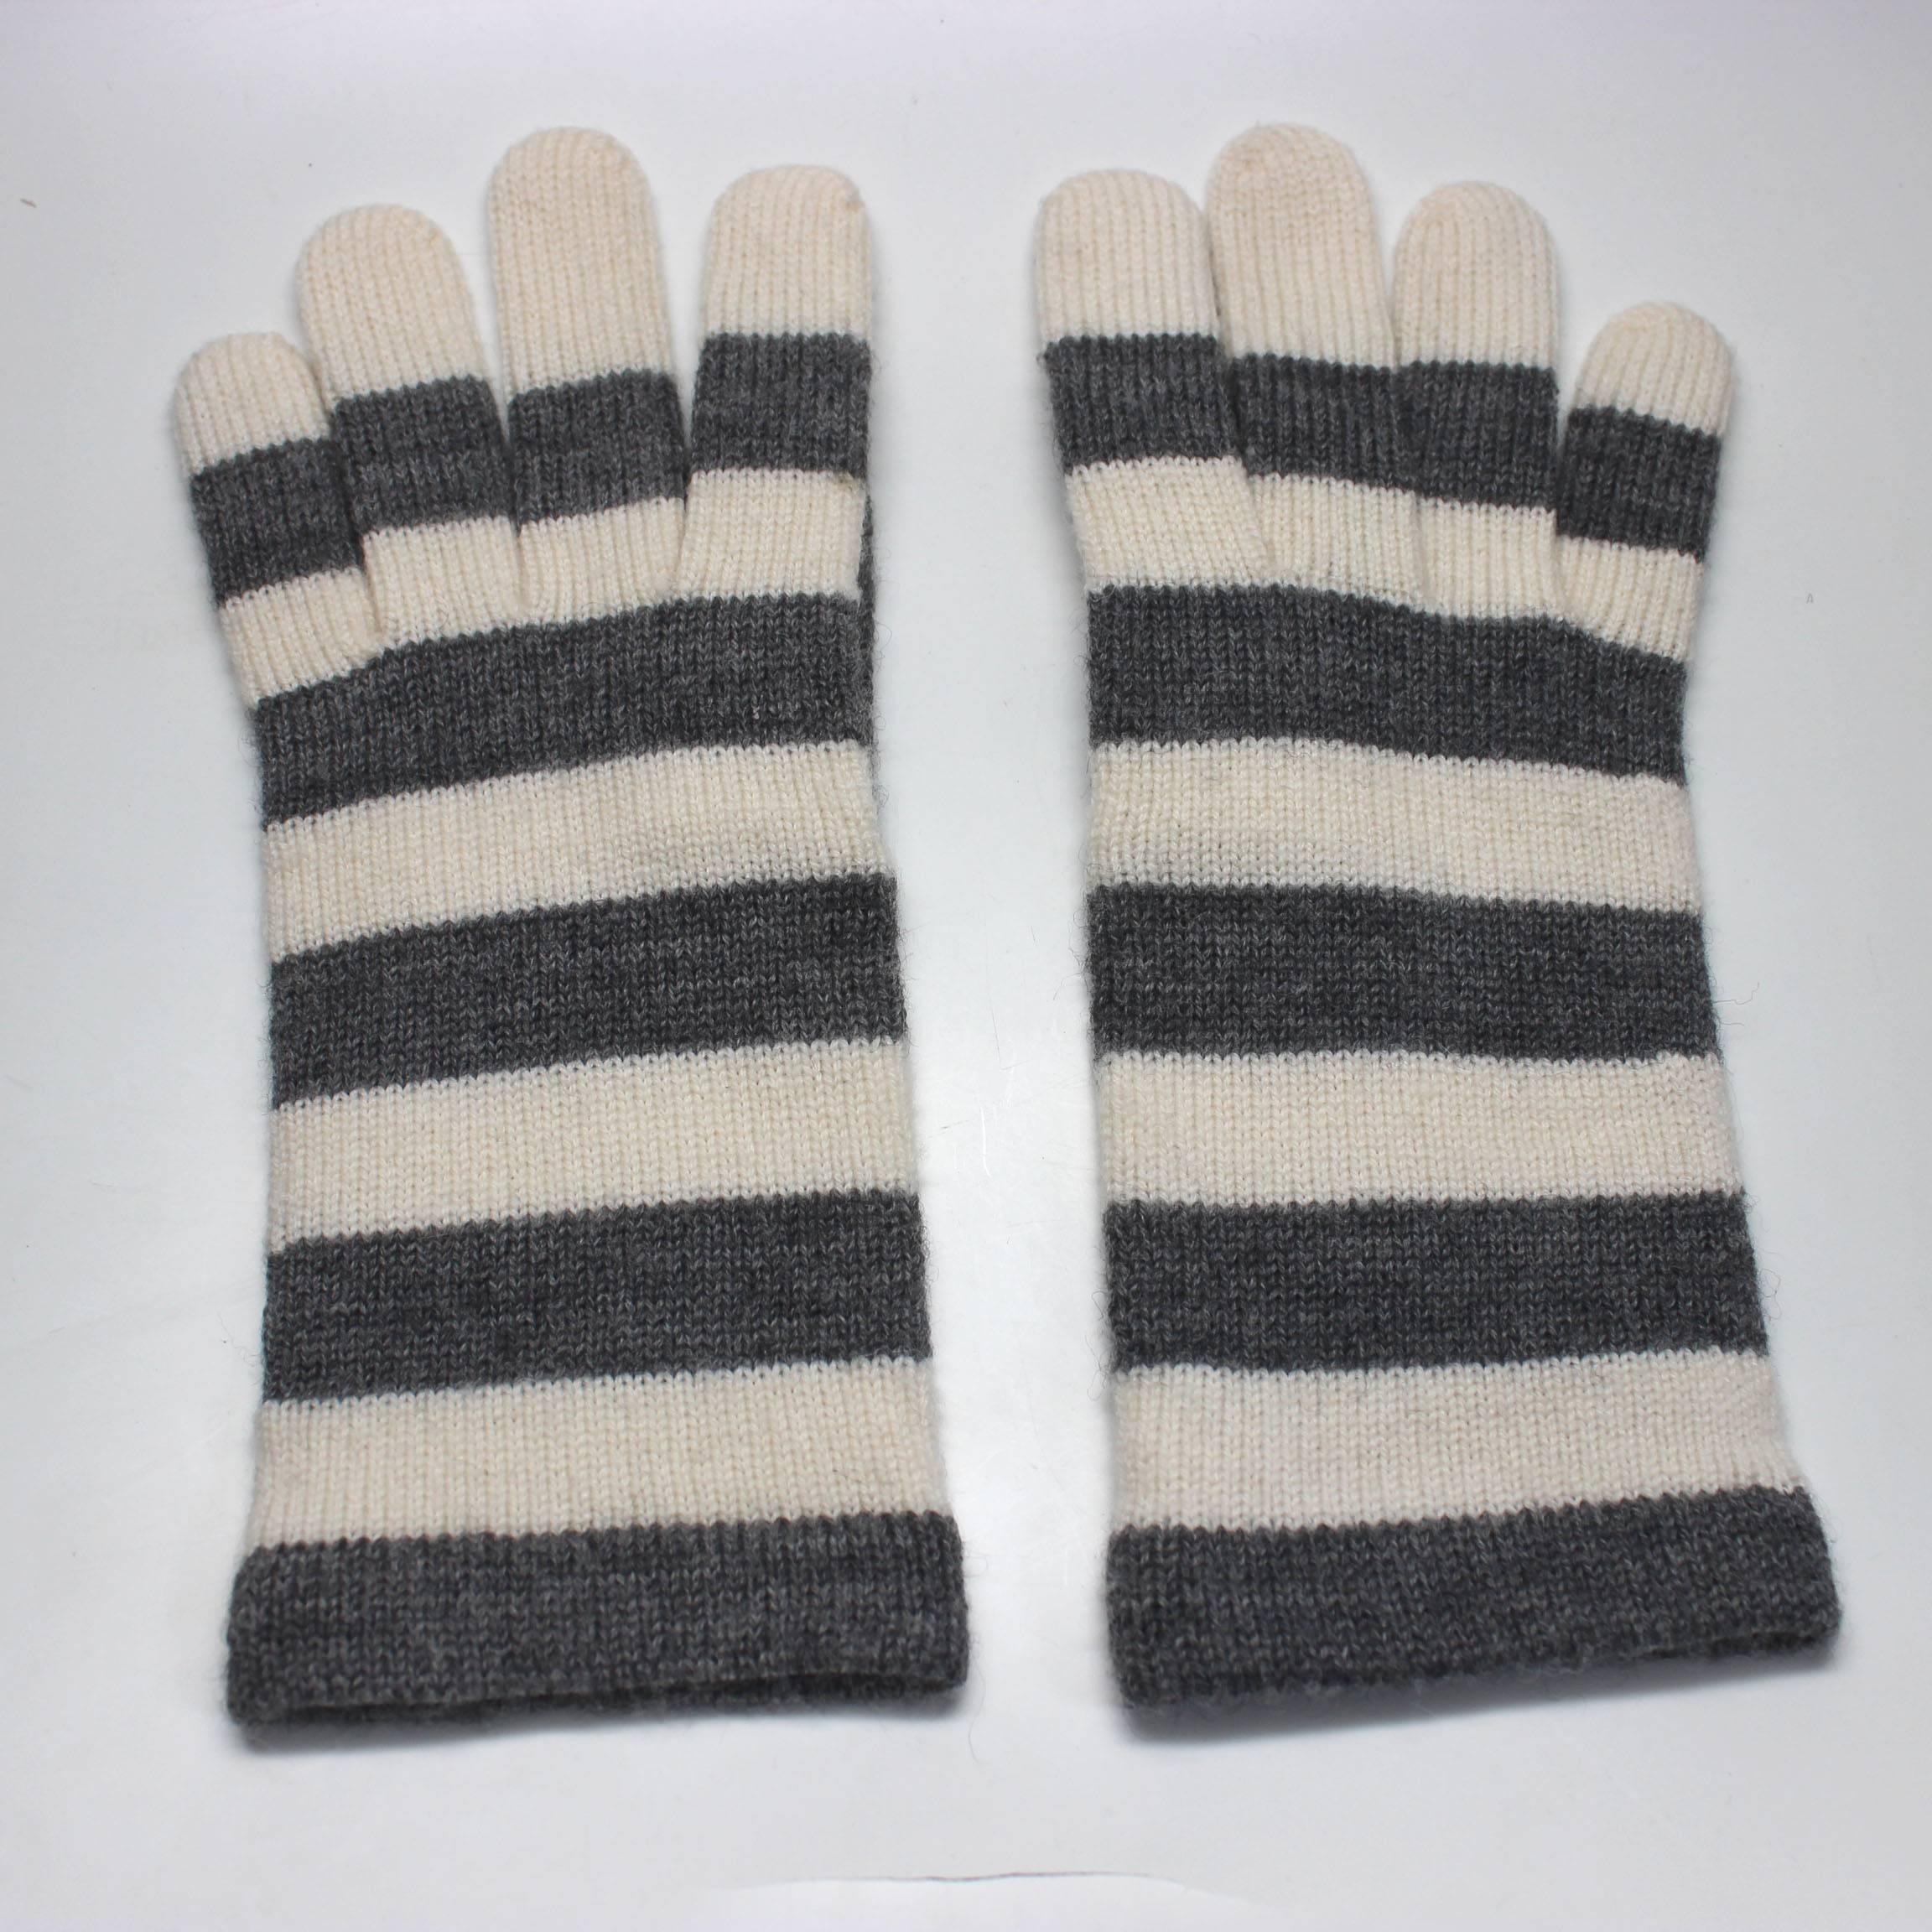 Designed by Margaretha Ley, these Escada gloves are great for the cold. 100% wool, the grey and white striped gloves are the perfect addition to a winter outfit. 